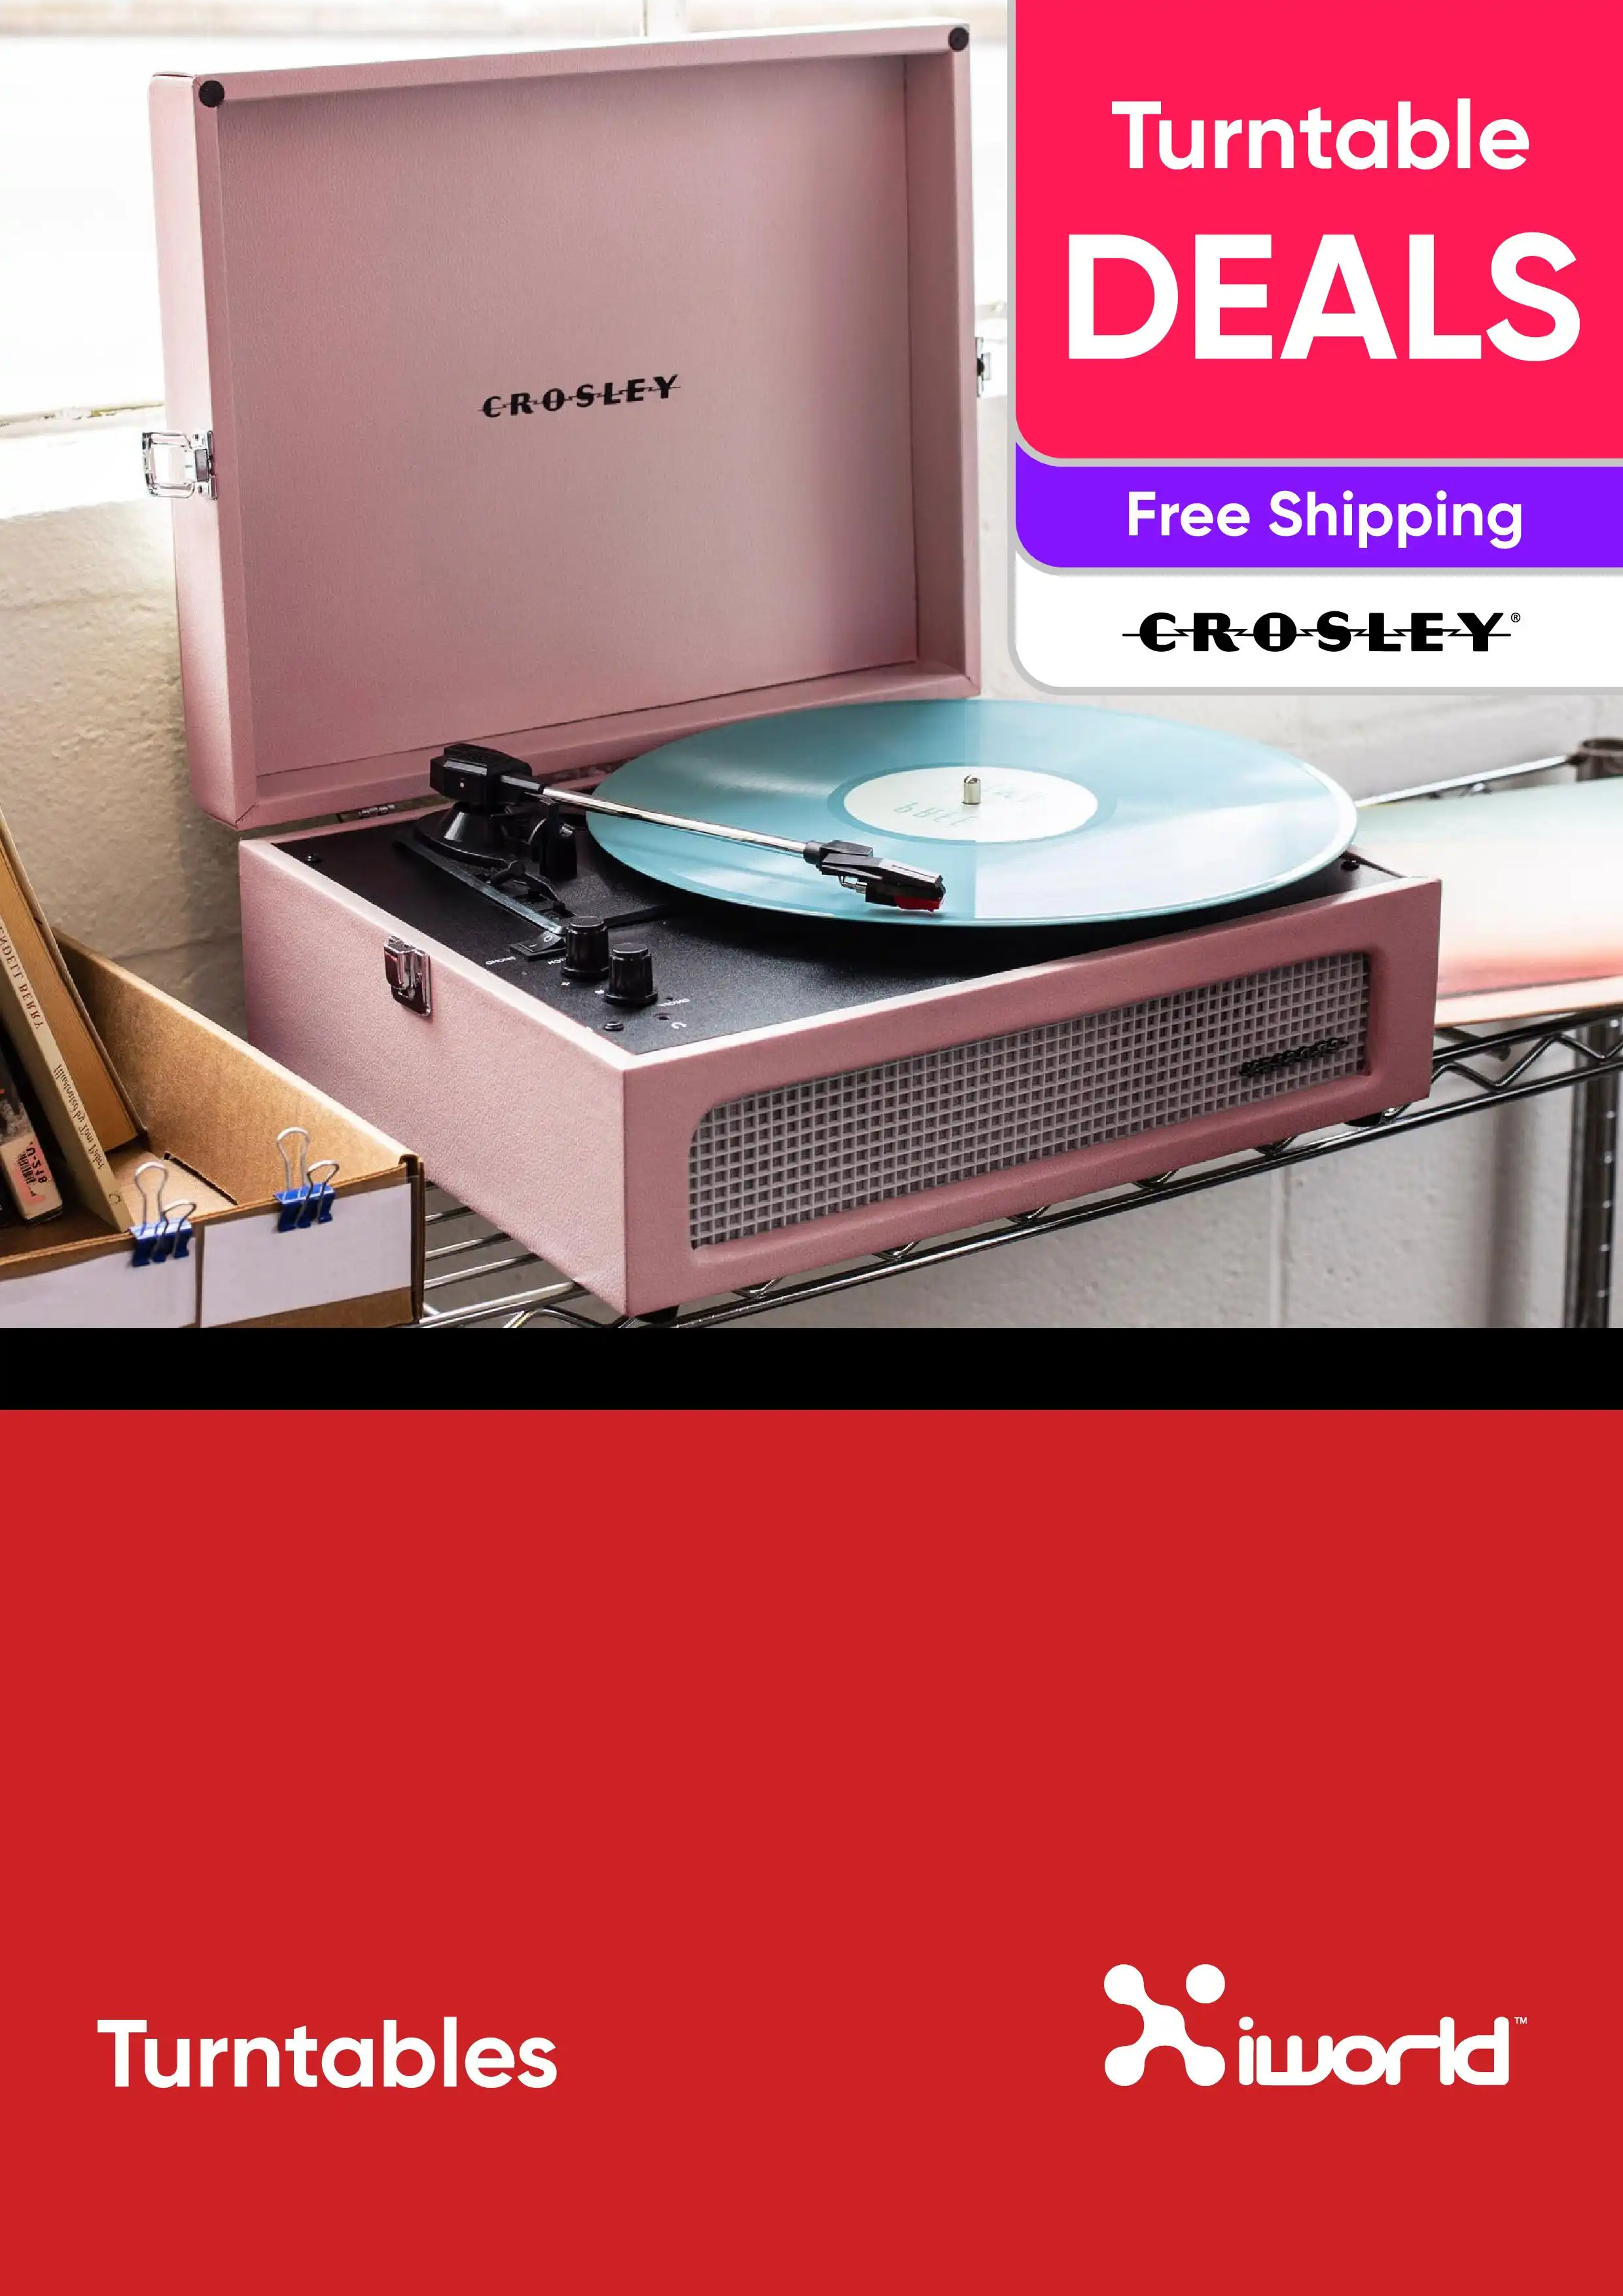 Turntable and Accessory Sale: Portable Turntables, Record Storage Crates, Bluetooth Speakers and More - Crossley